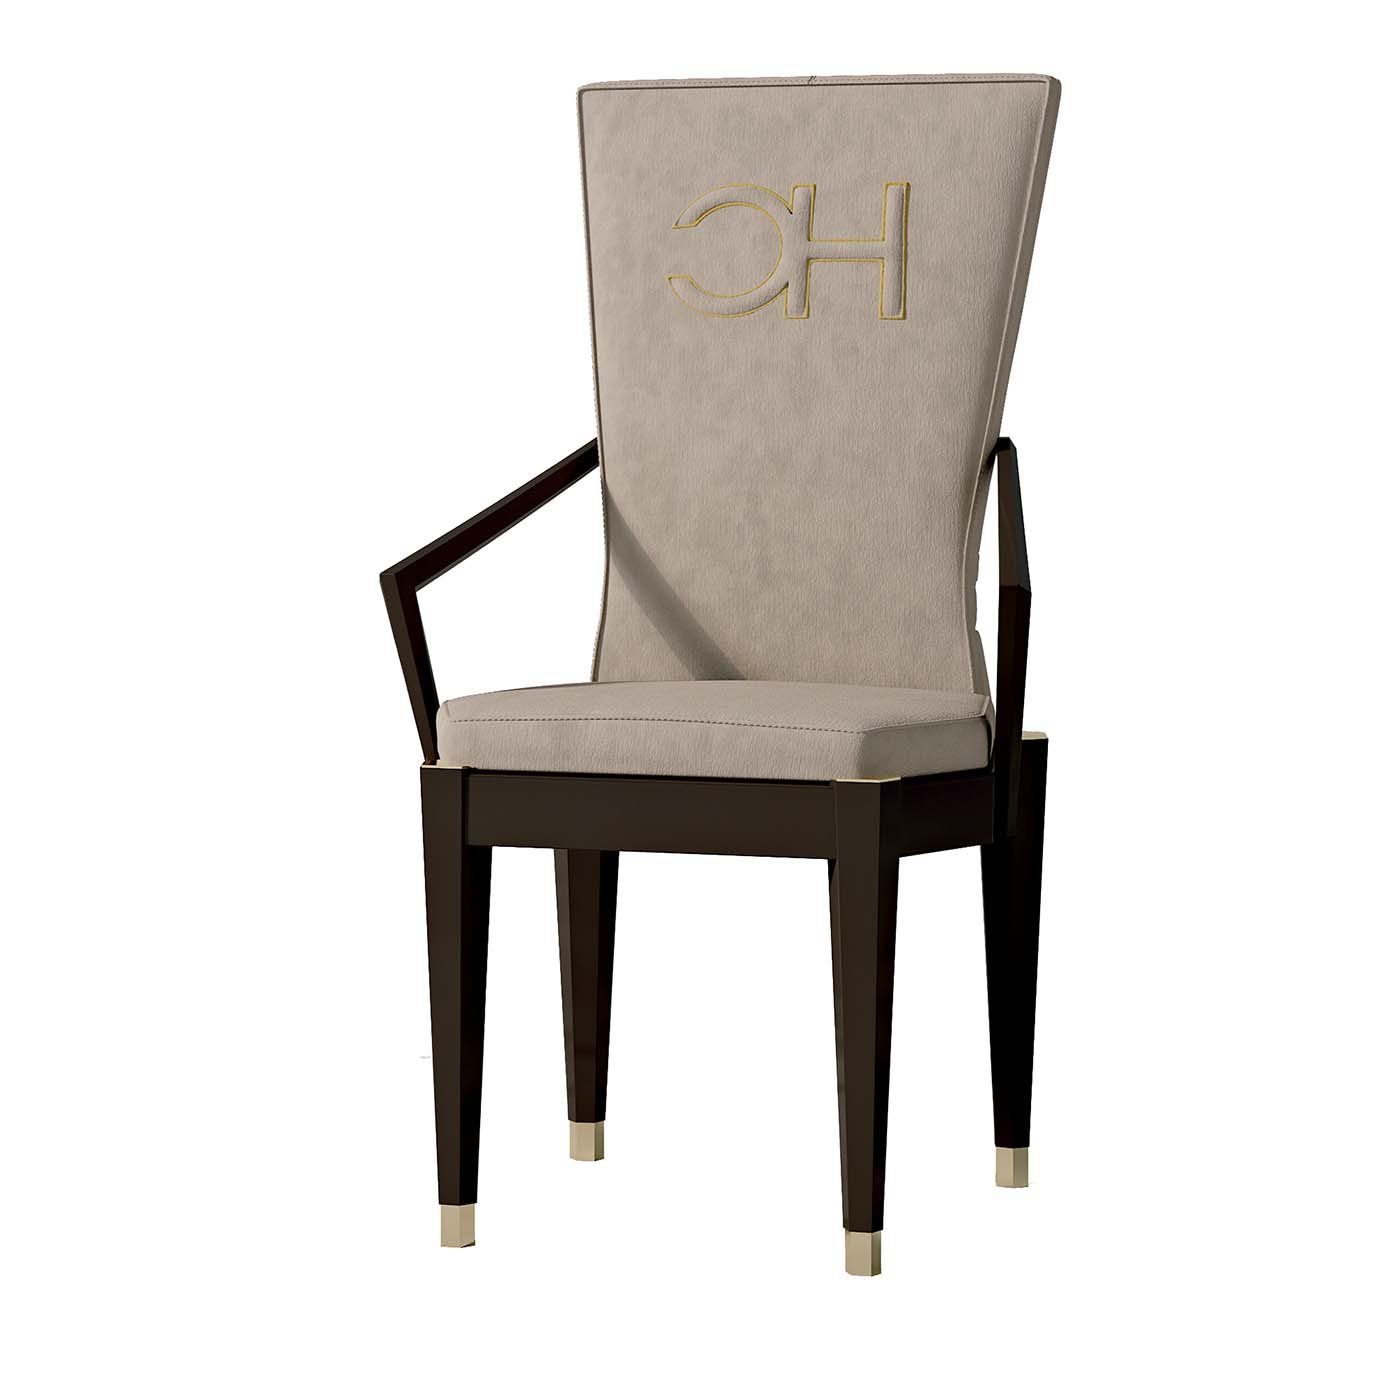 Temptation Chair with Armrests - Main view